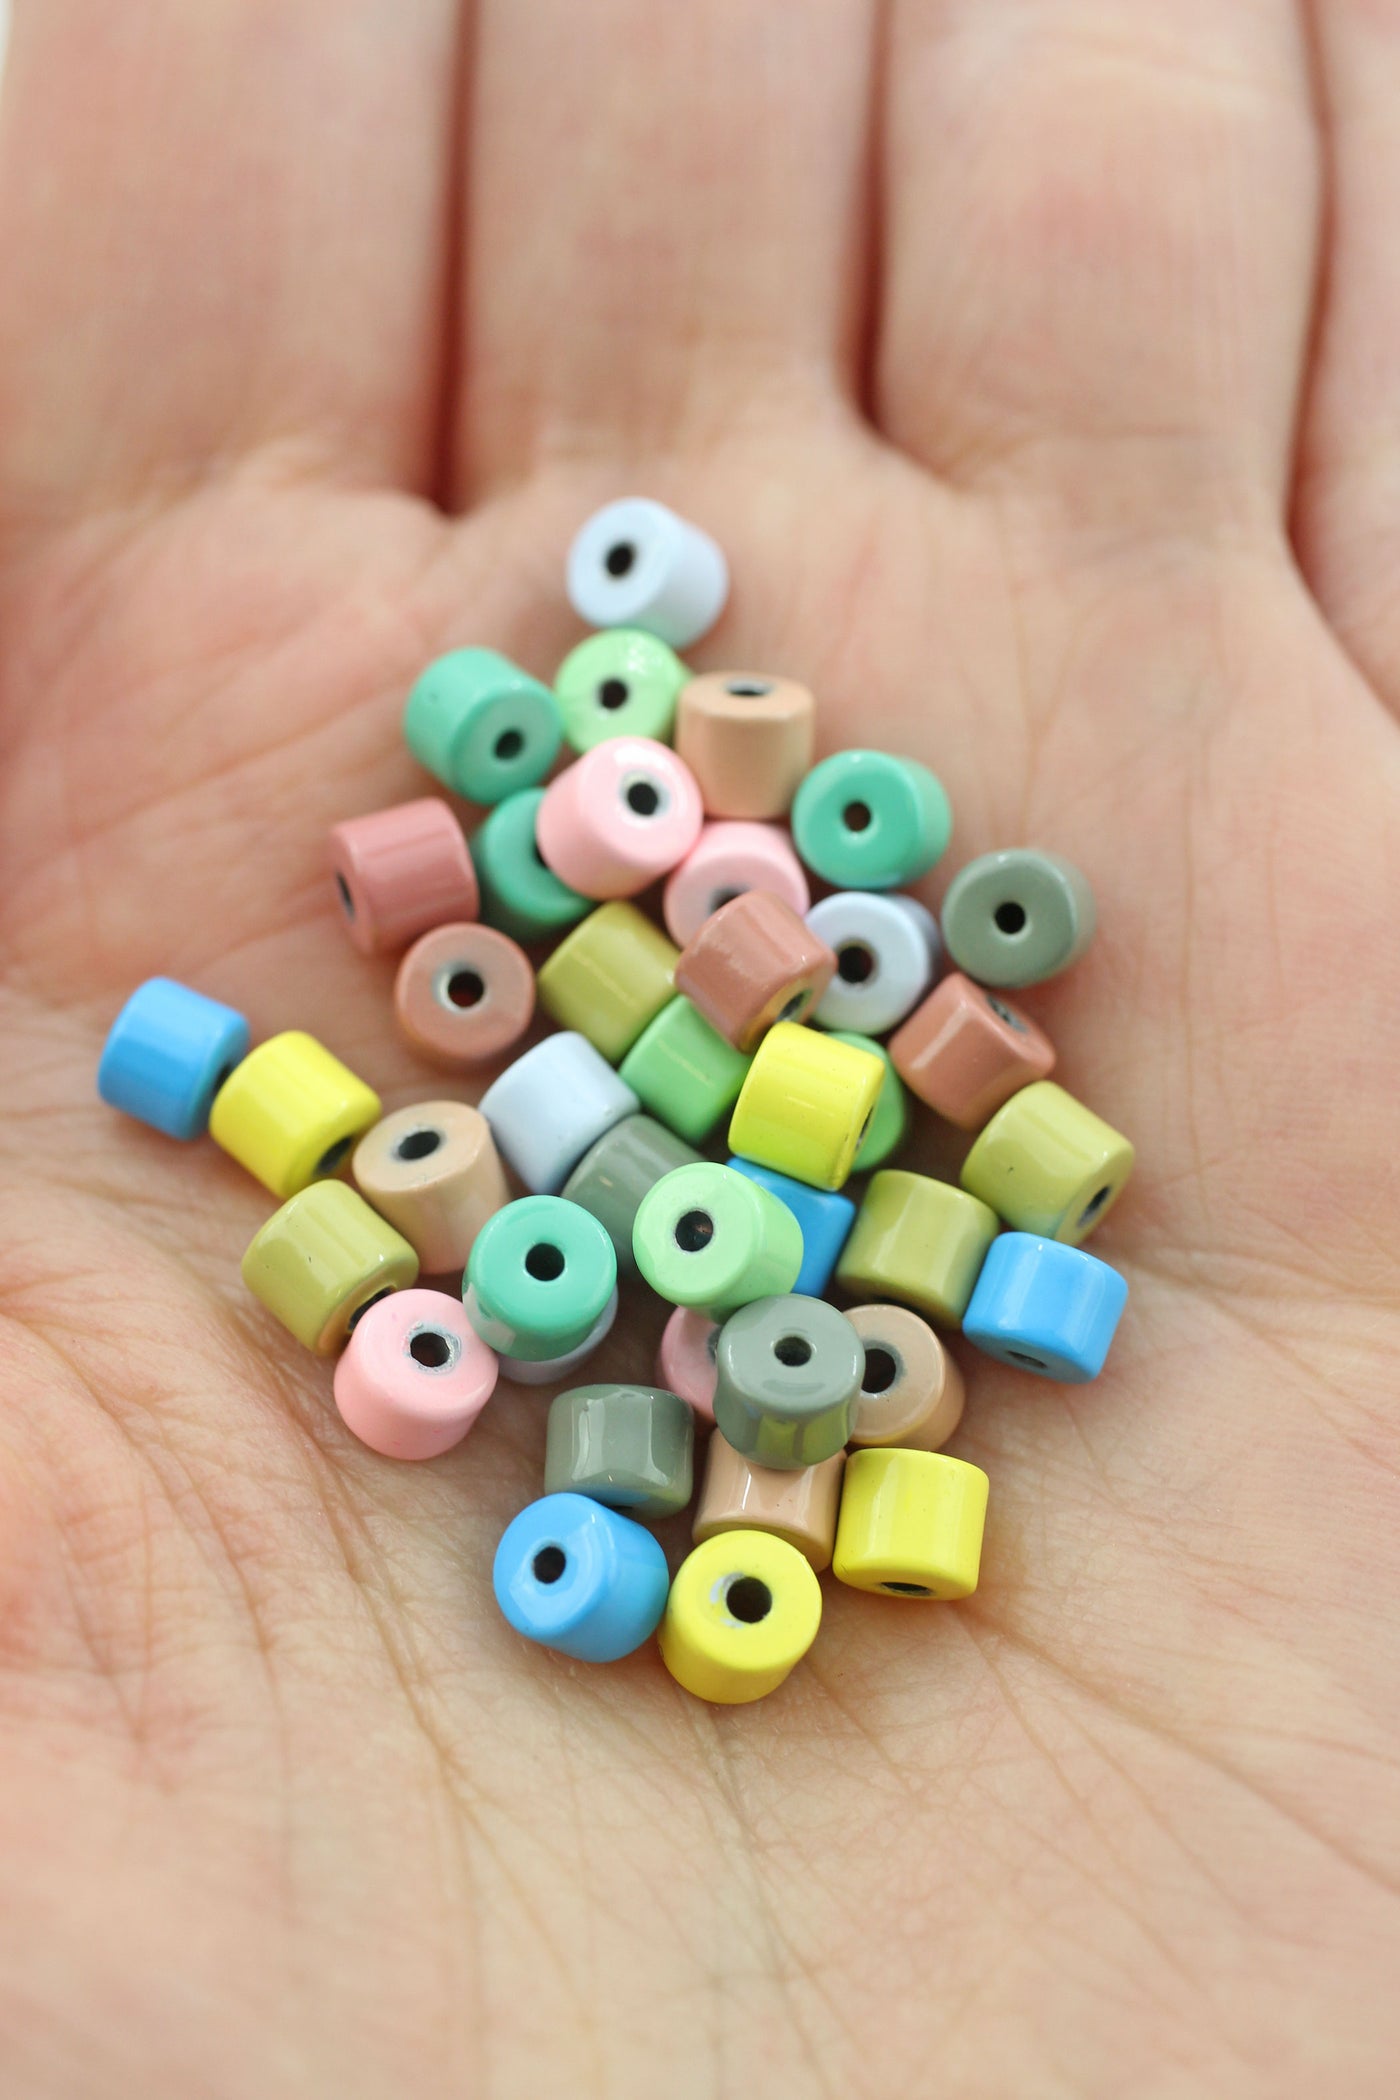 Candy Disc Enamel Heishi Beads, 2mm, 4mm, Multicolor Assortments, 40 pieces